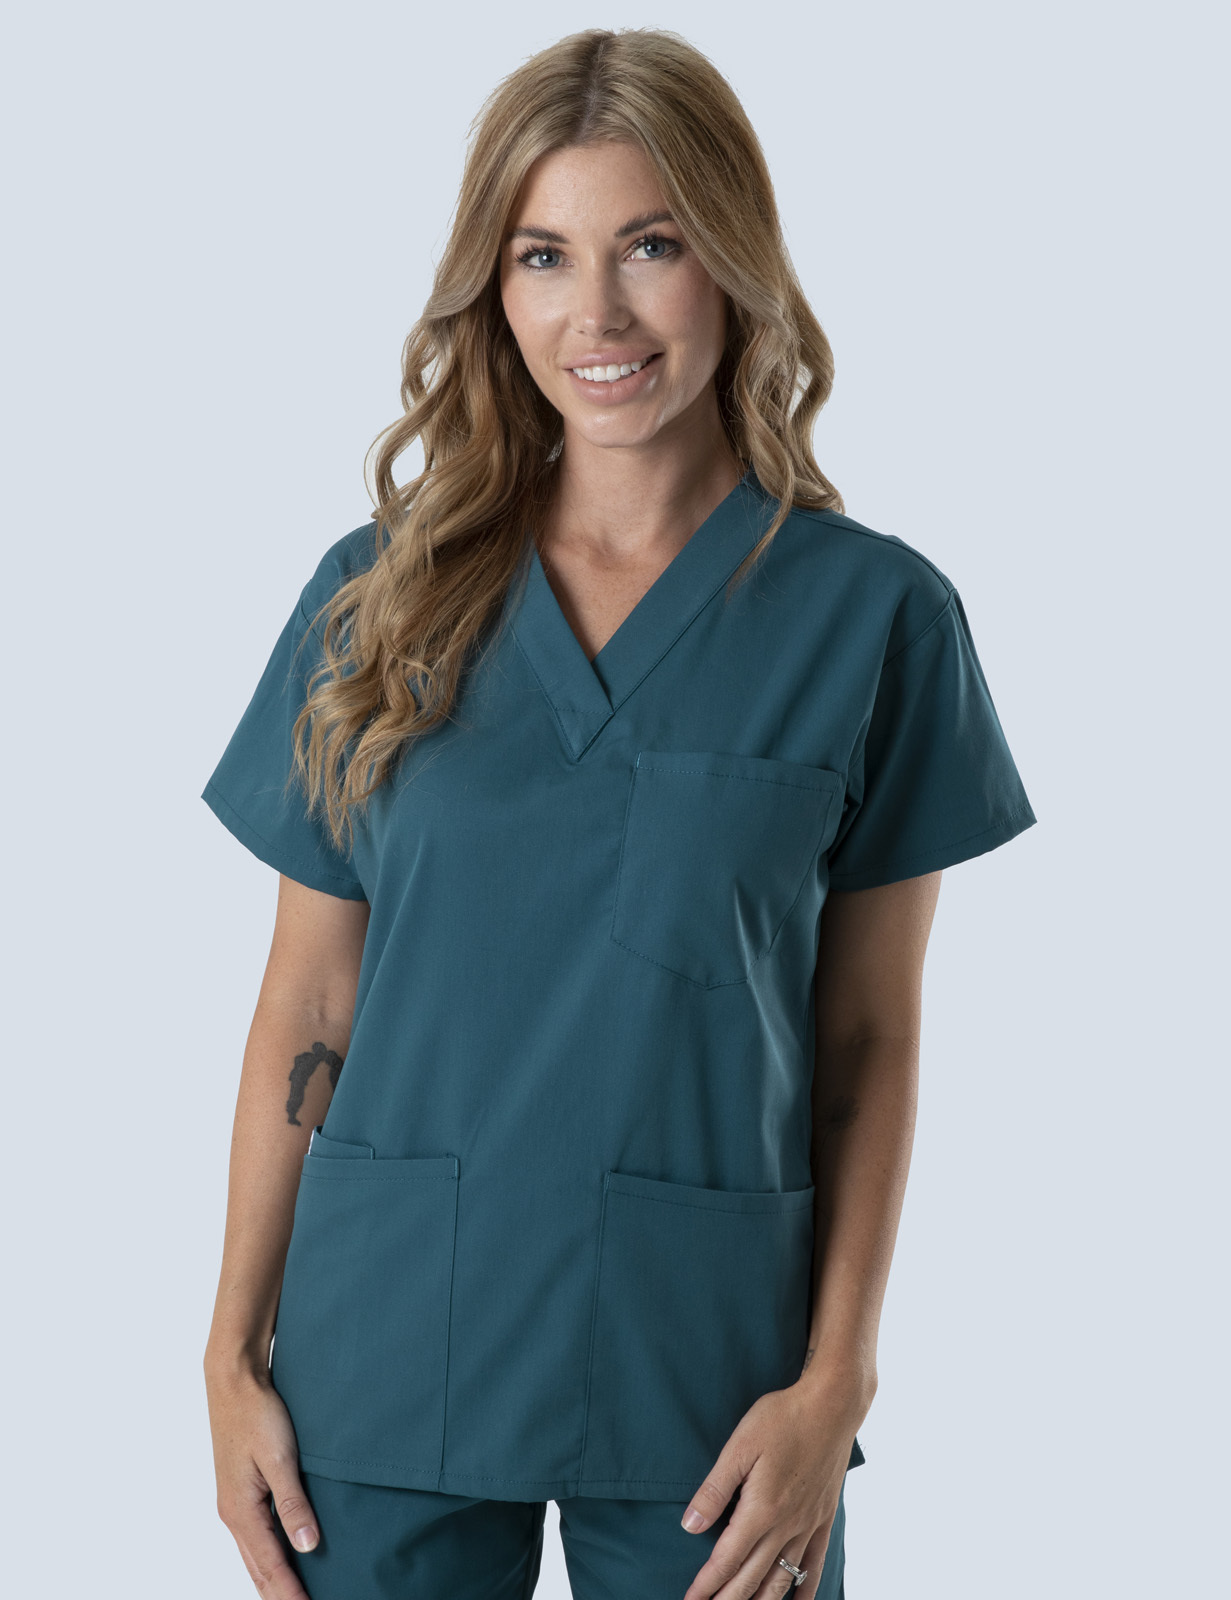 St. George Hospital - Cardiology (4 Pocket Scrub Top and Cargo Pants in Caribbean incl Logos)